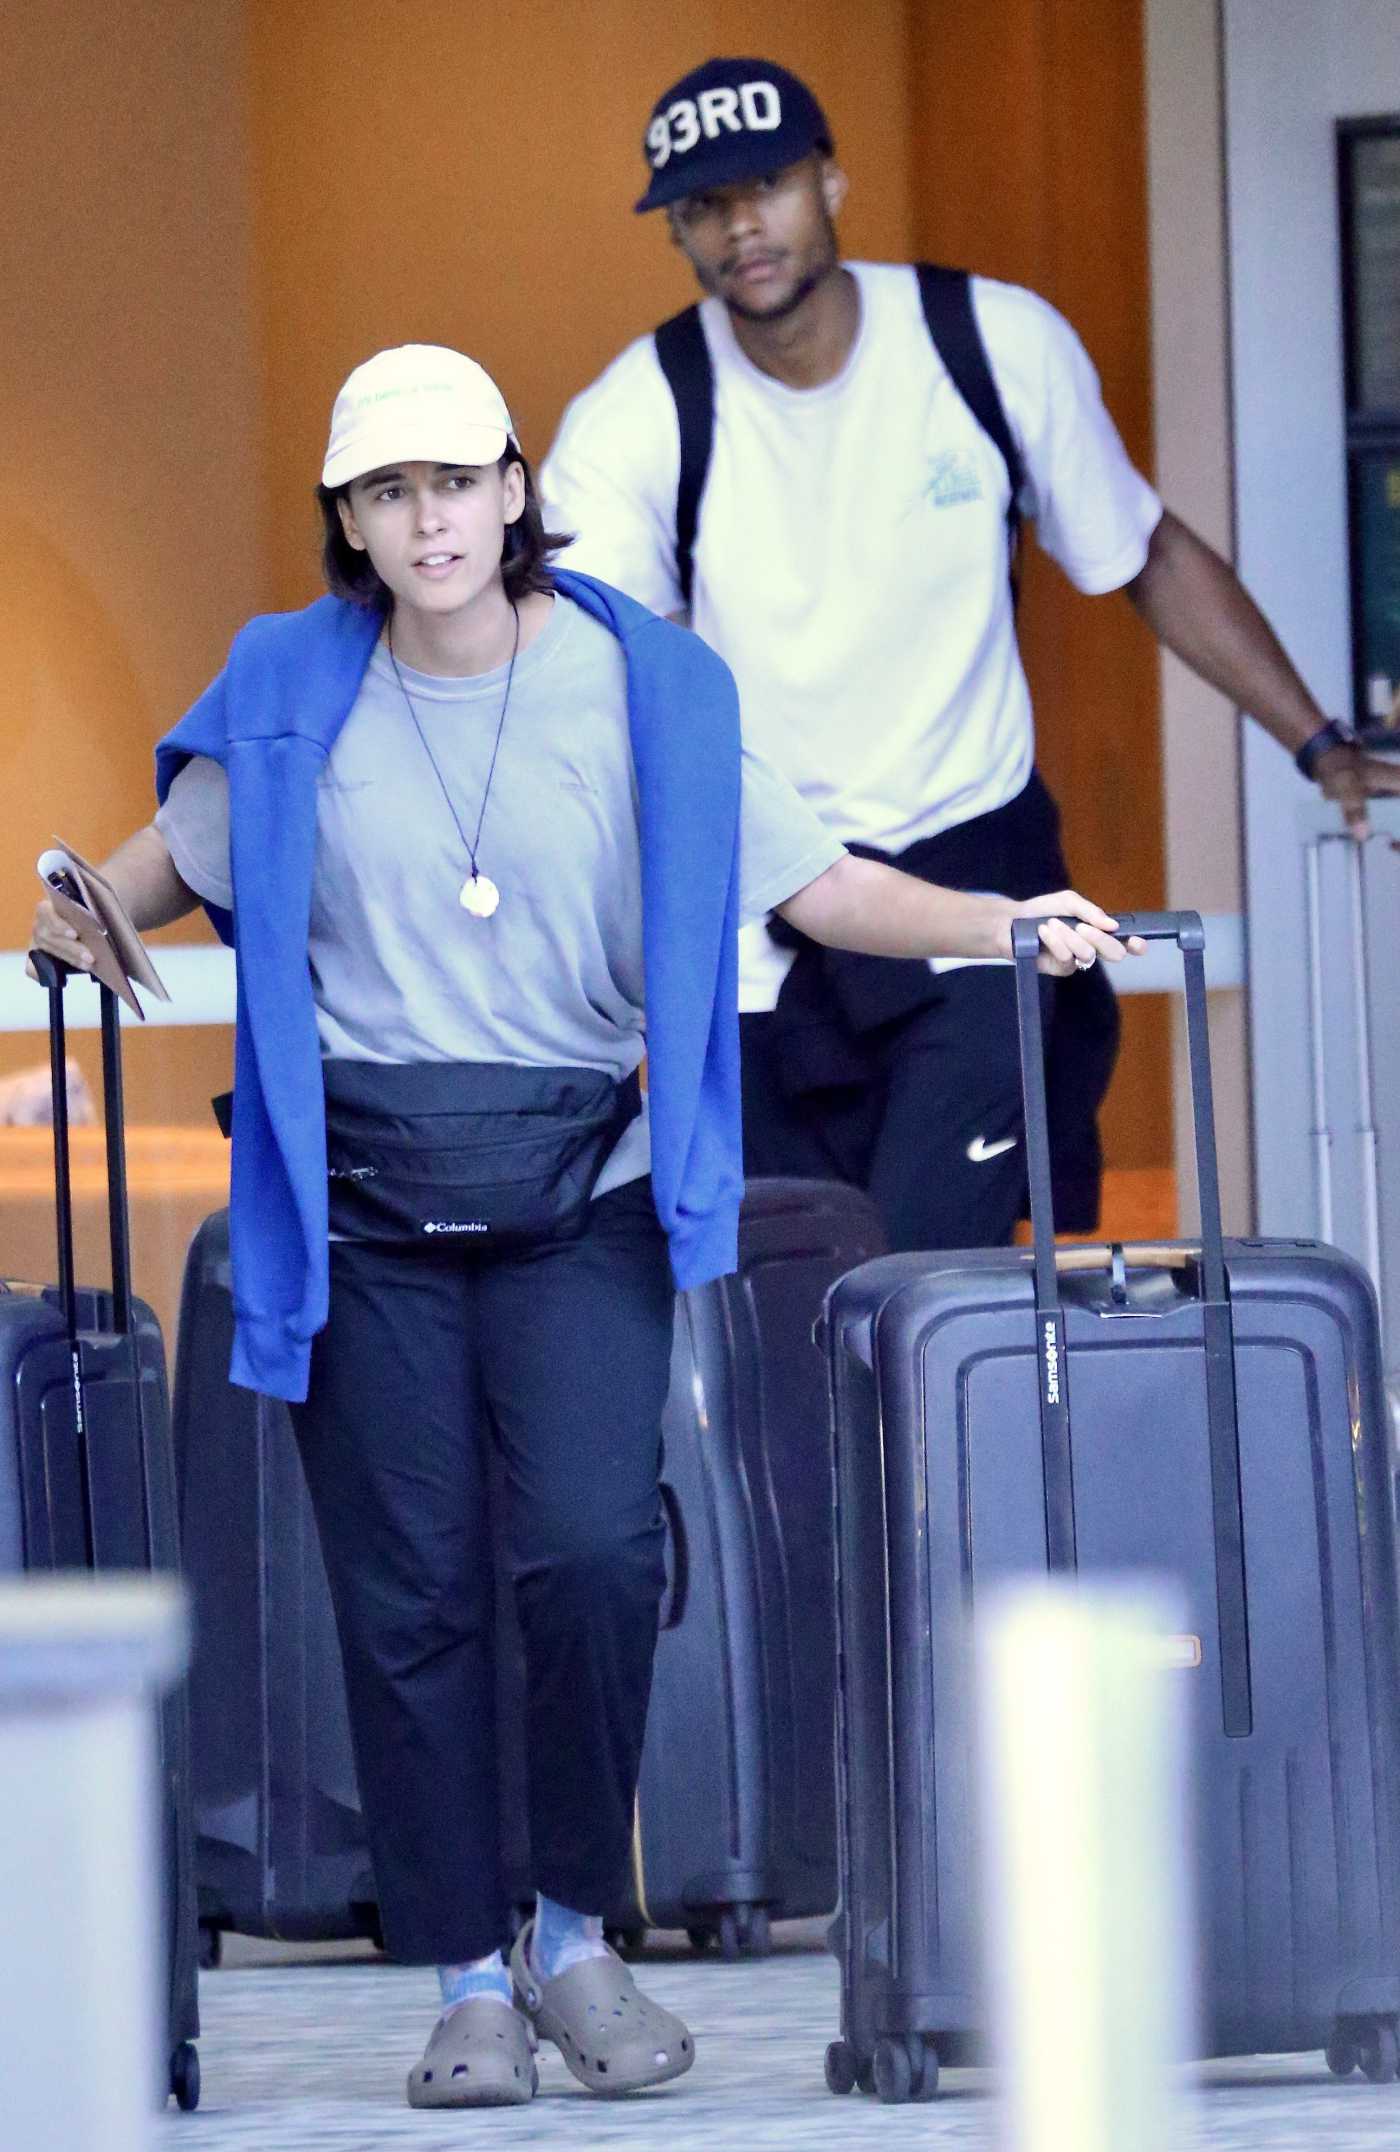 Naomi Scott in a White Cap Was Seen Out with Her Husband Jordan Spence in Cairns 08/06/2022